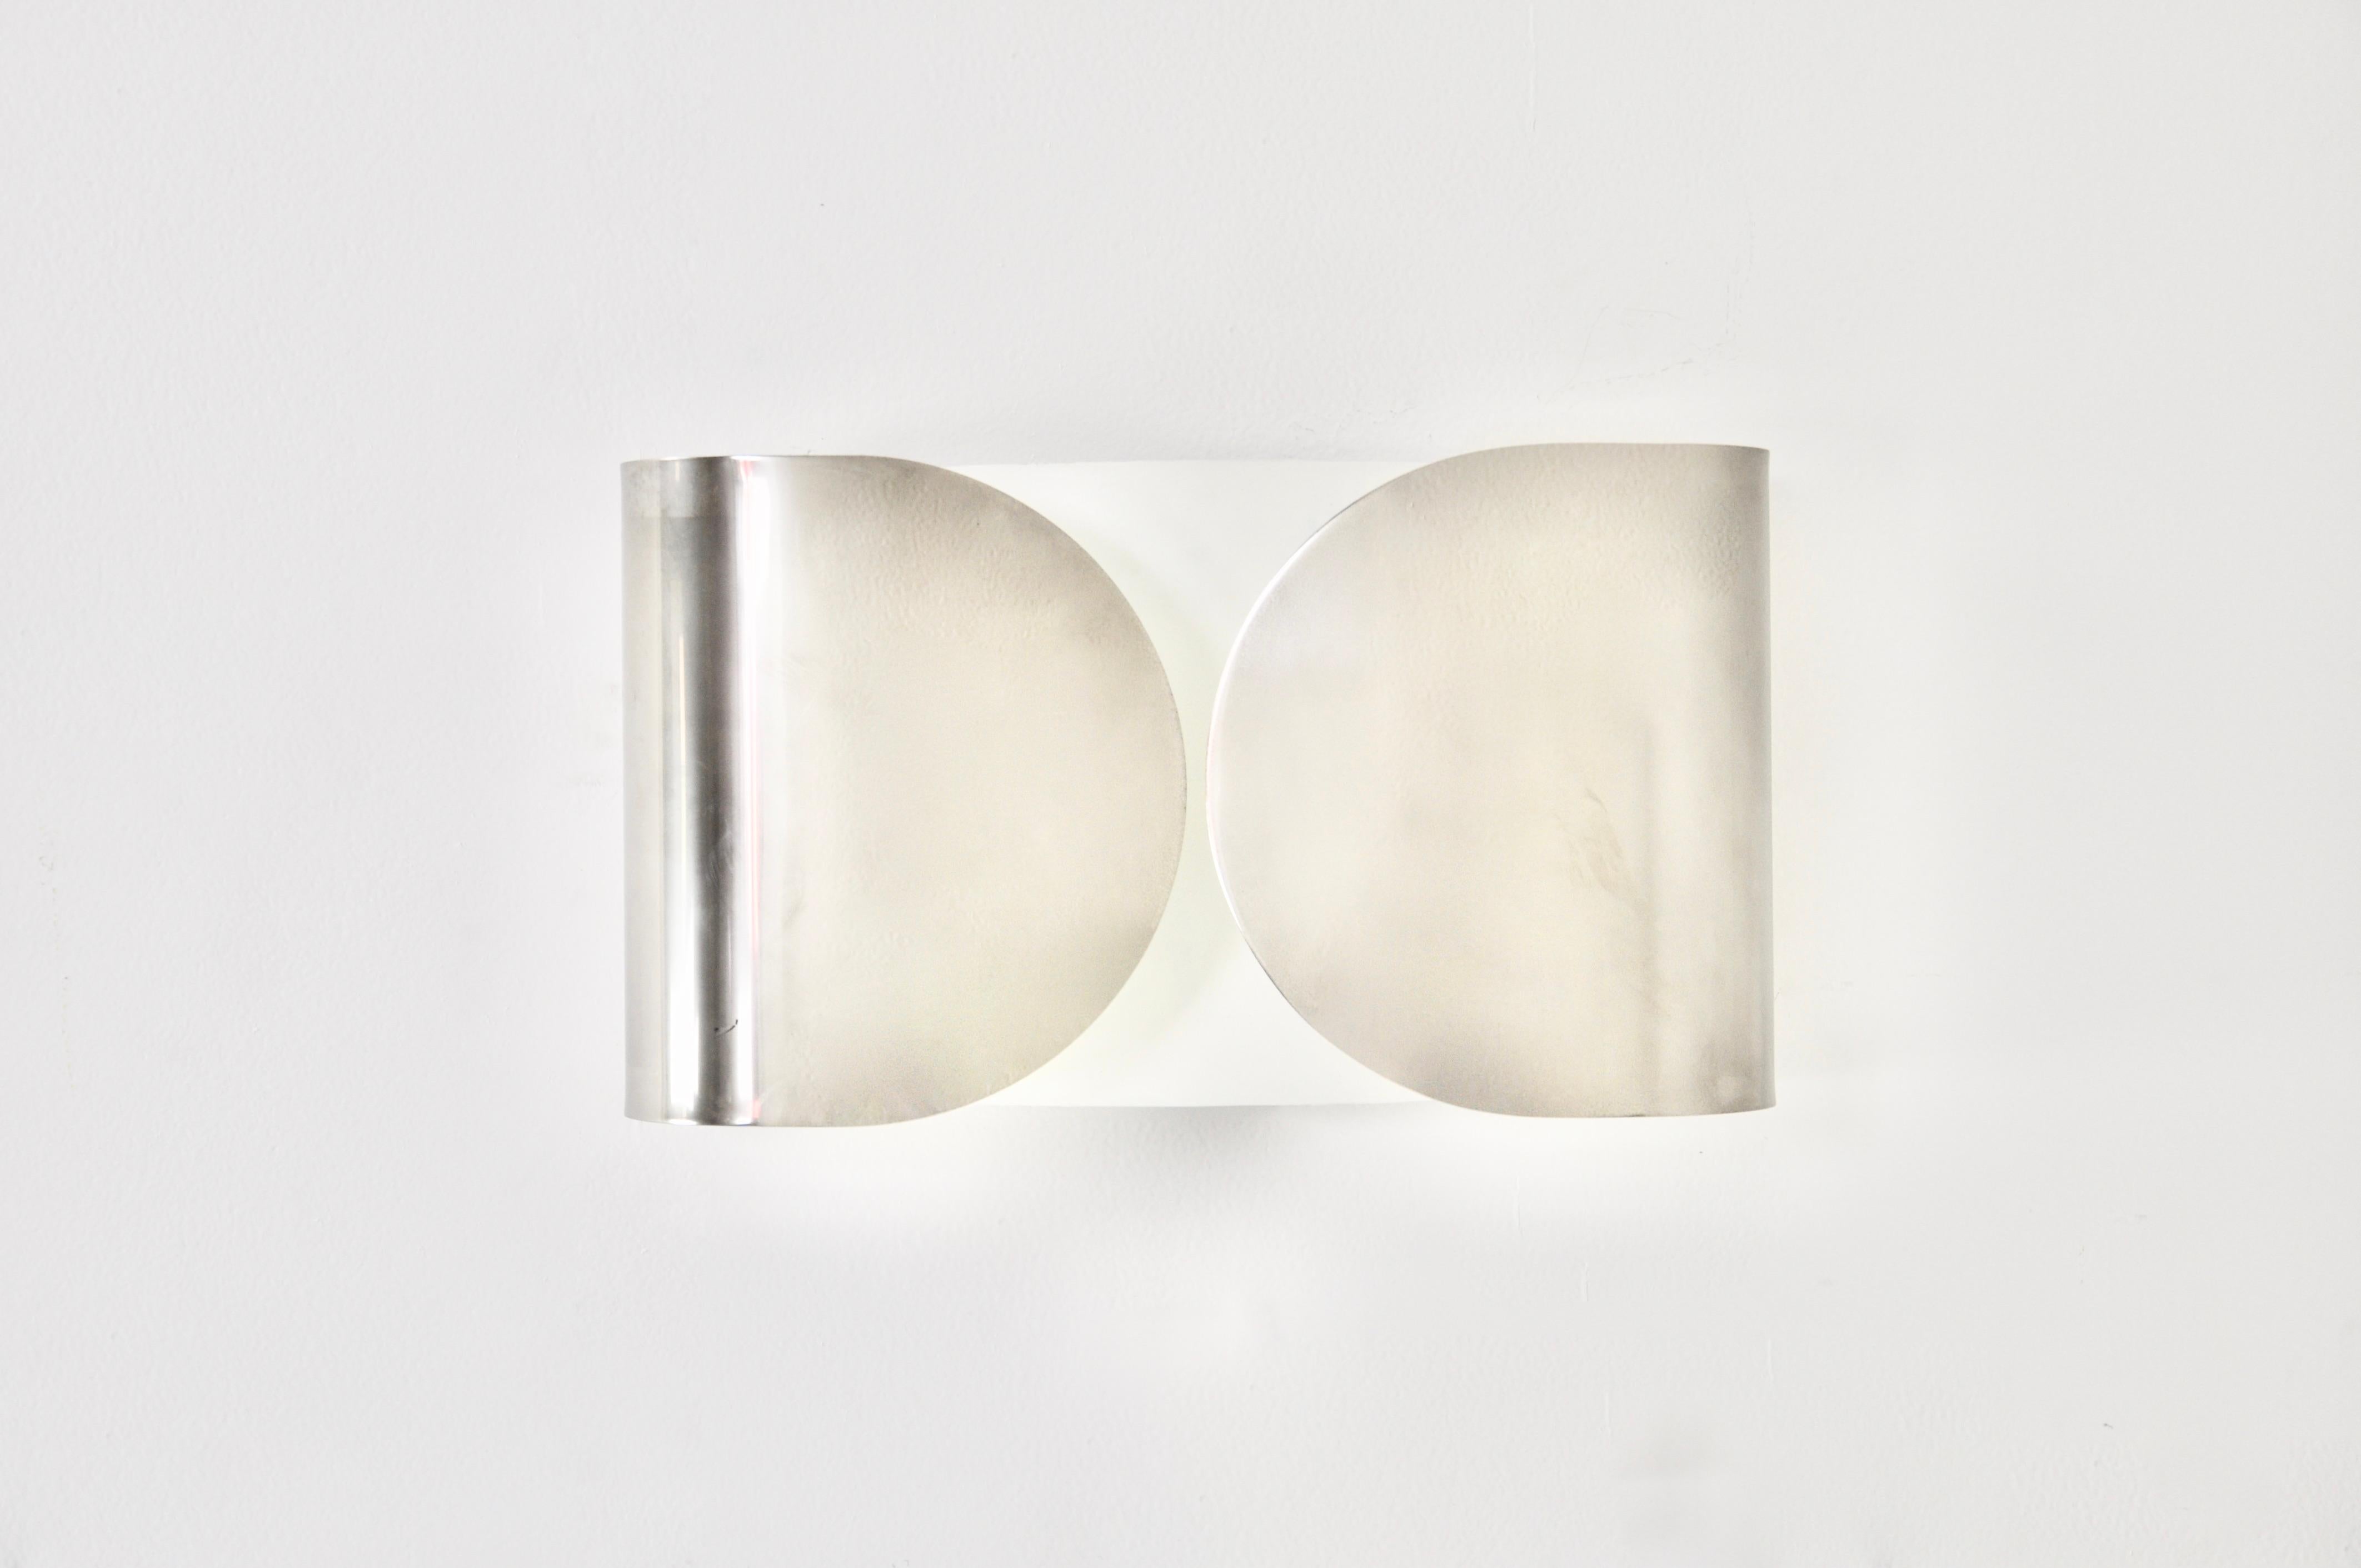 Sconce in chrome metal. stamped Flos. Wear due to time and age of the sconce.